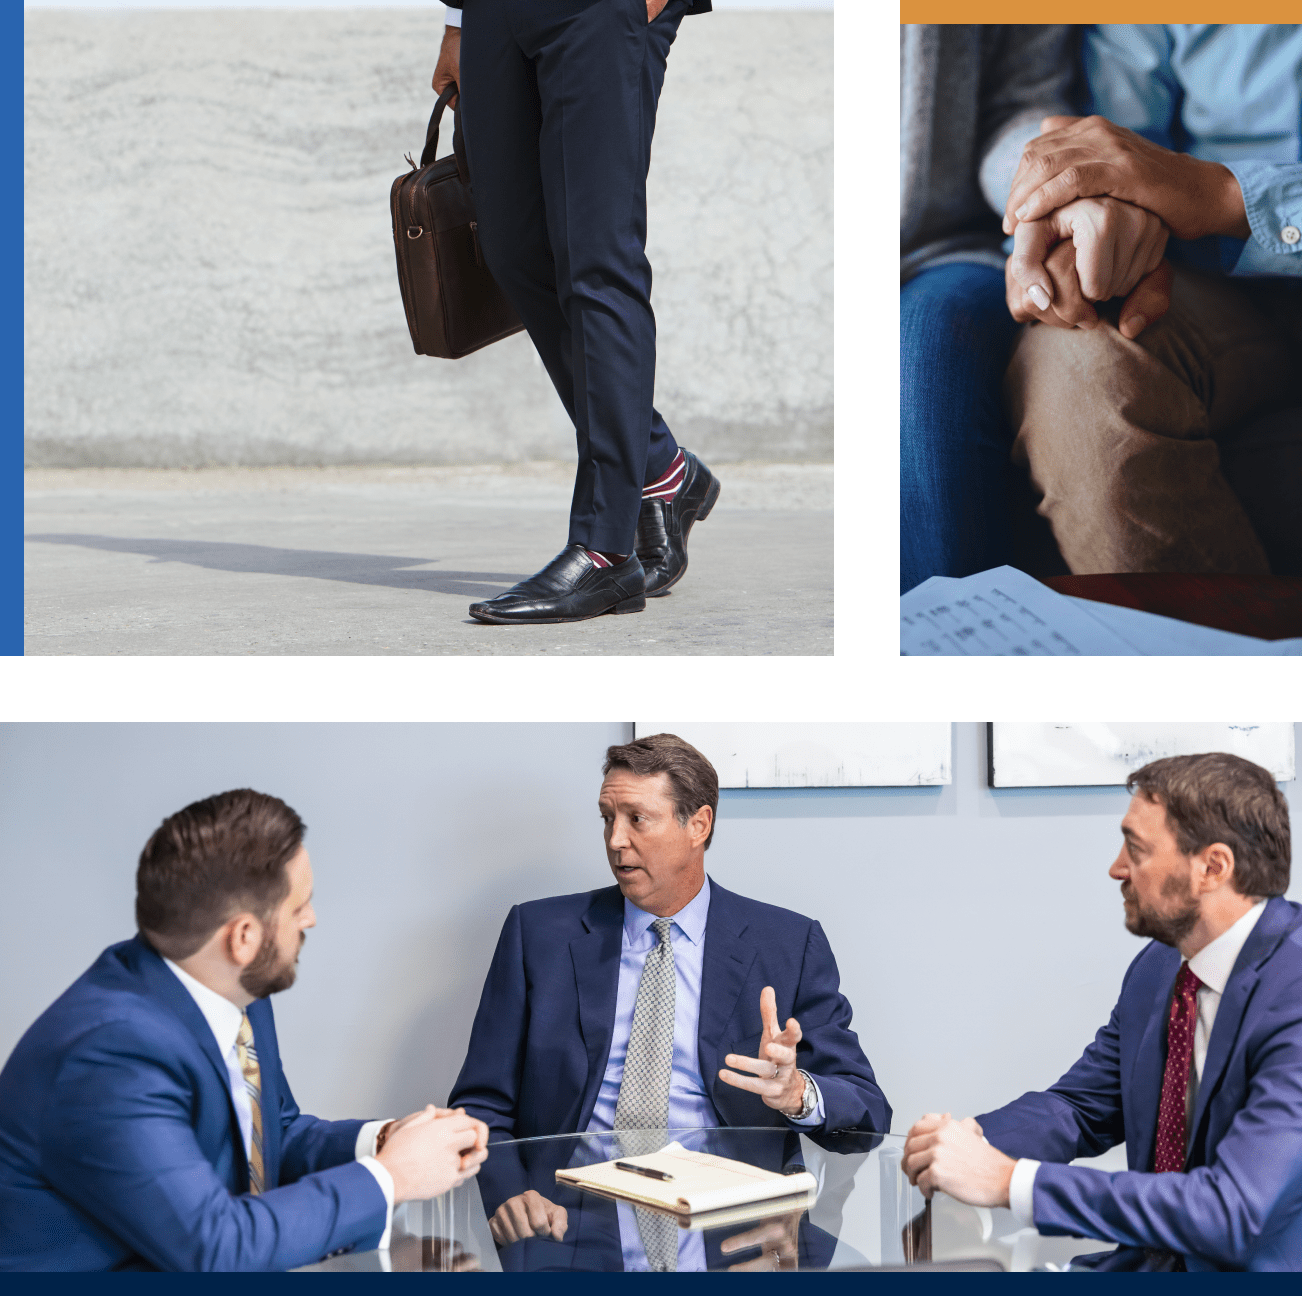 Collage: businessman with briefcase, clasped hands, discussion in progress.